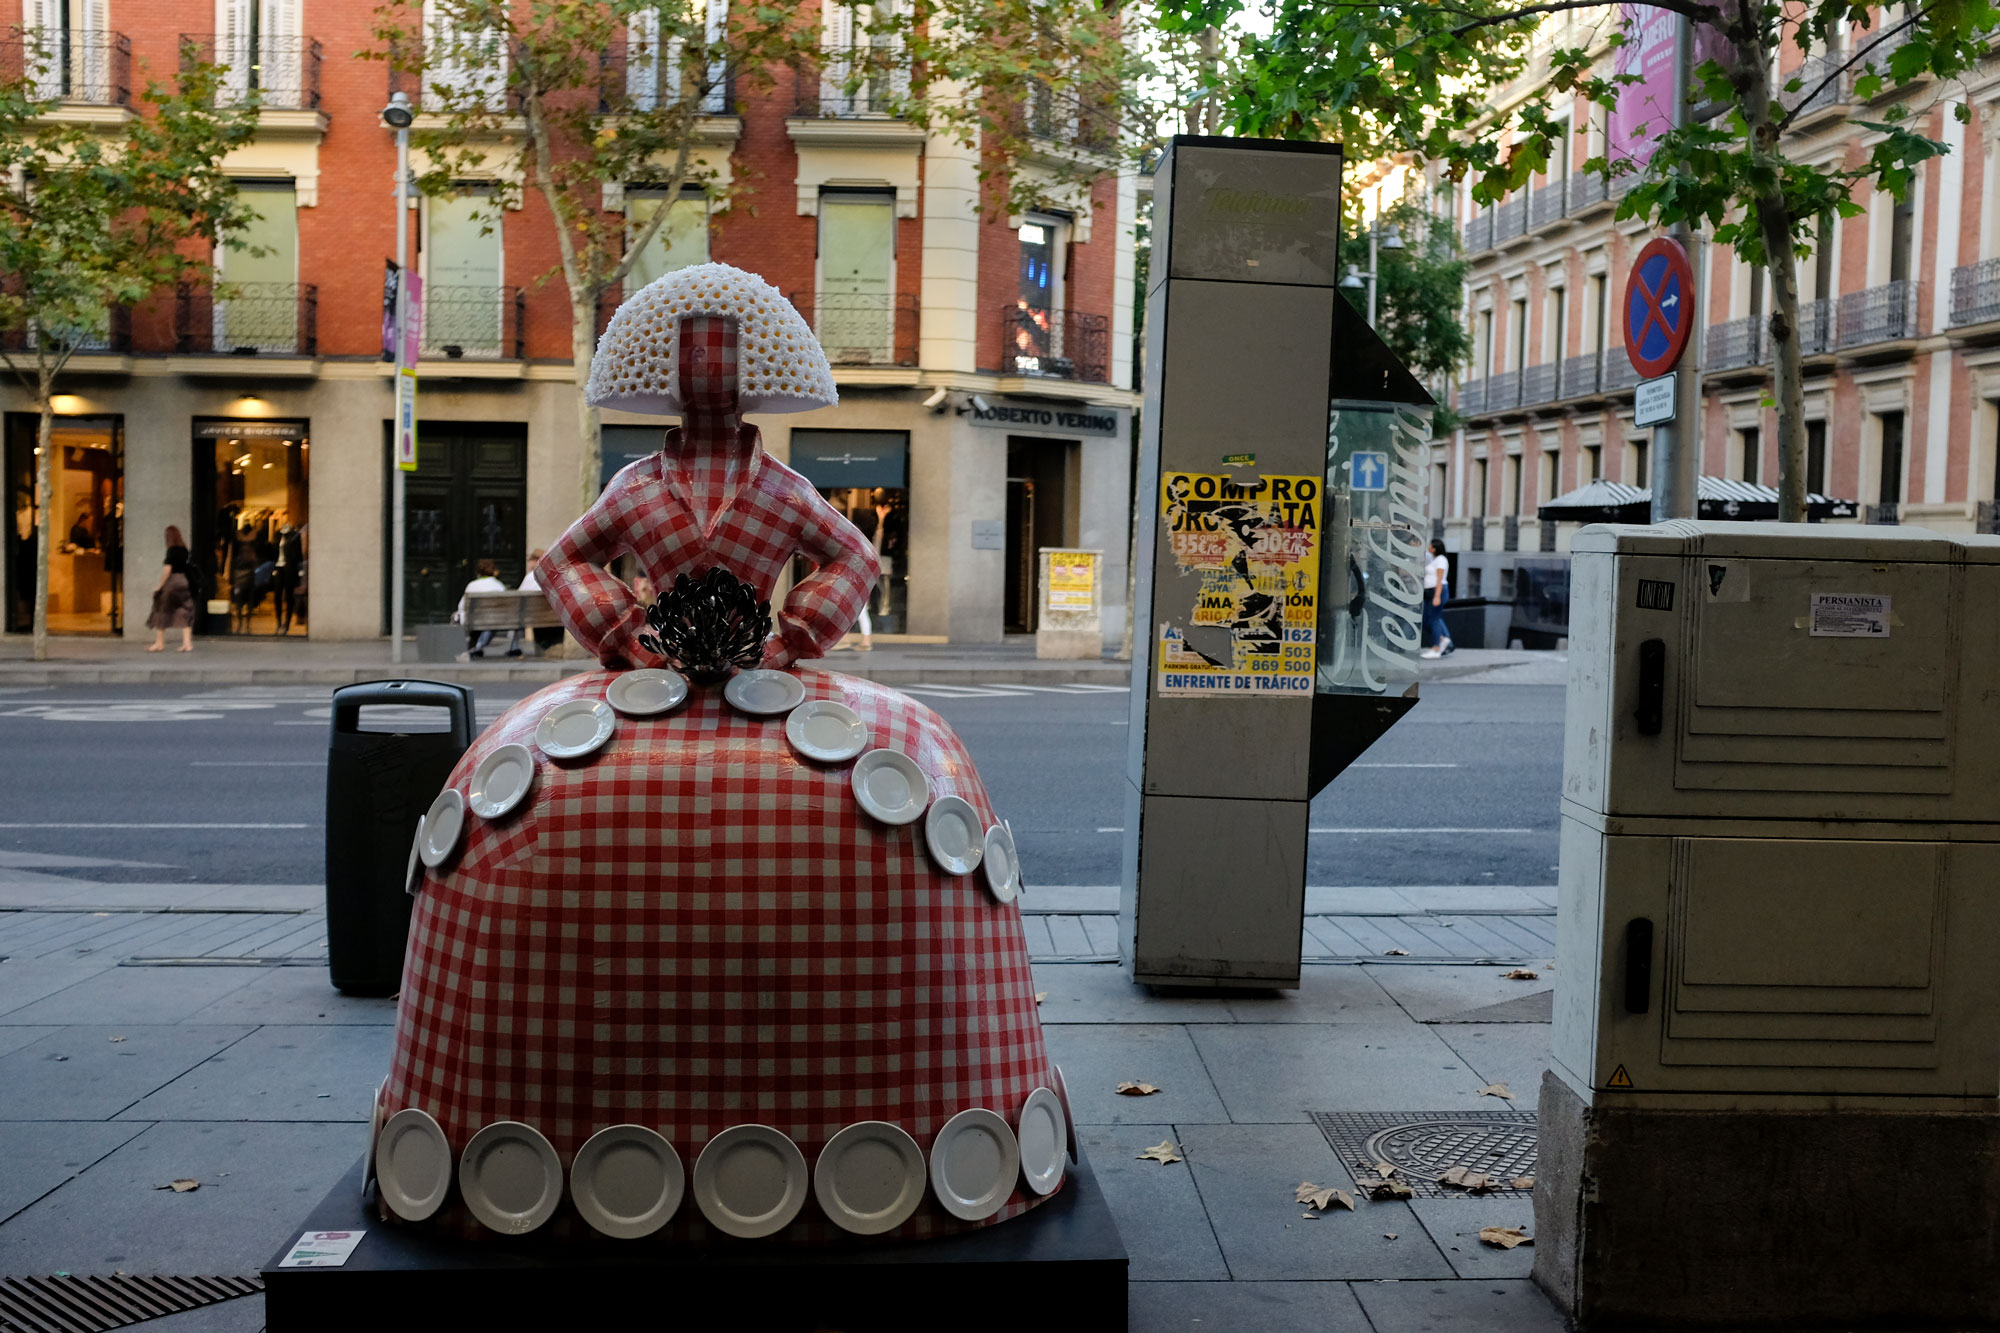 A Menina statue - she is dressed as a table, with a gingham dress and plates decorating